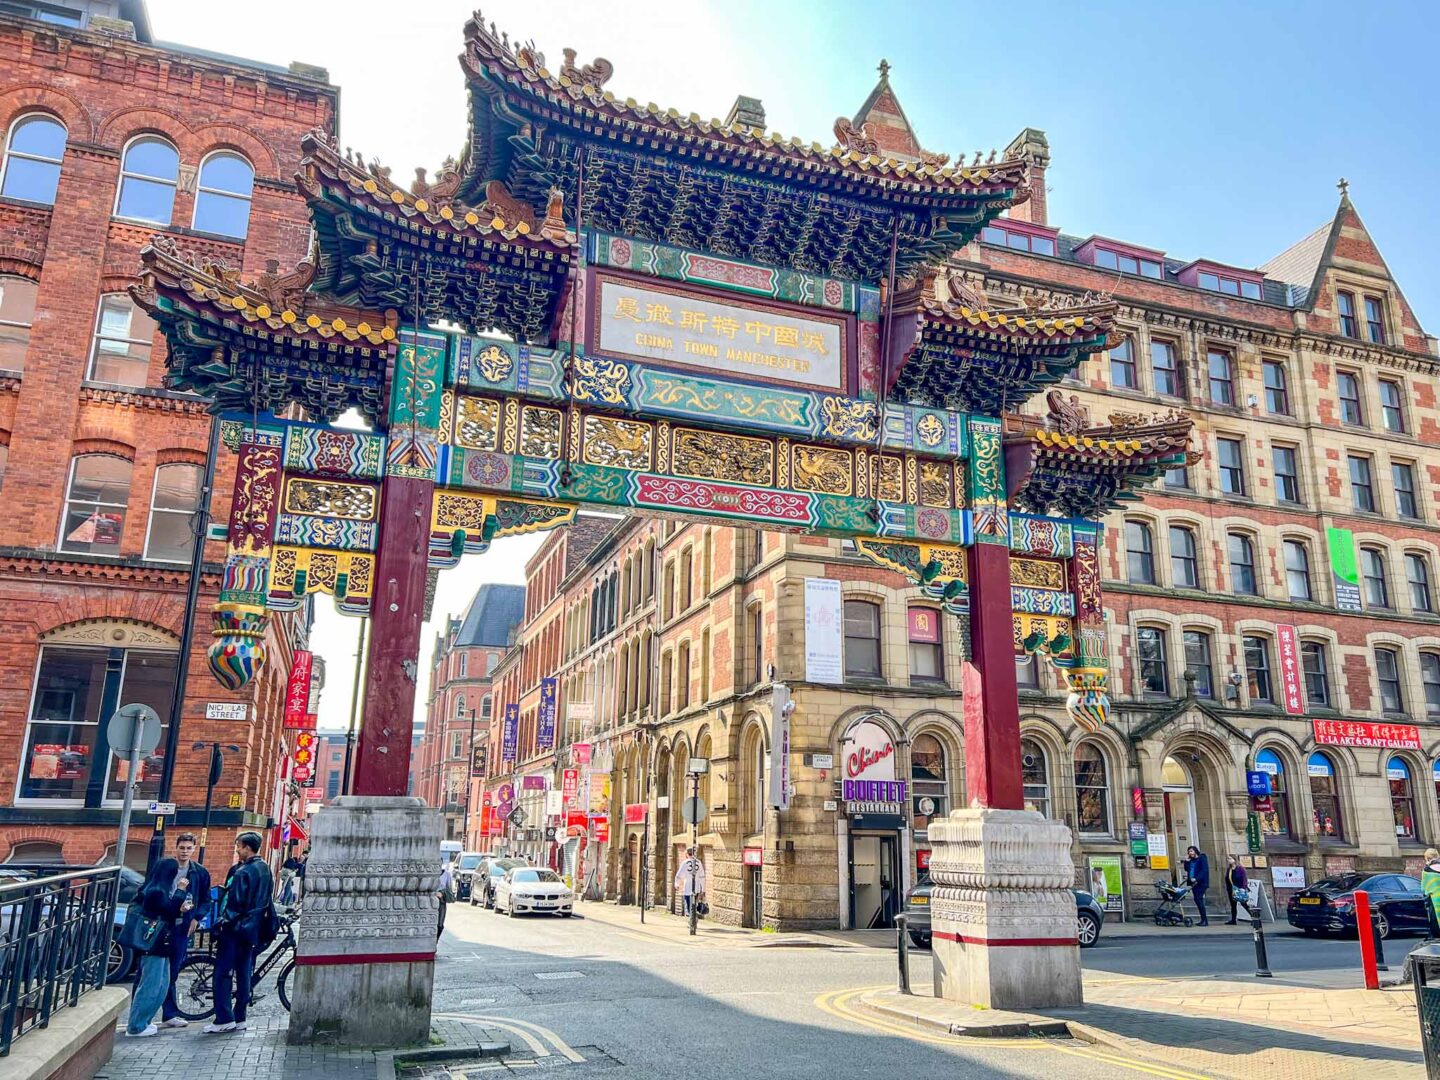 Entrance to Chinatown in Manchester, one day in Manchester, 